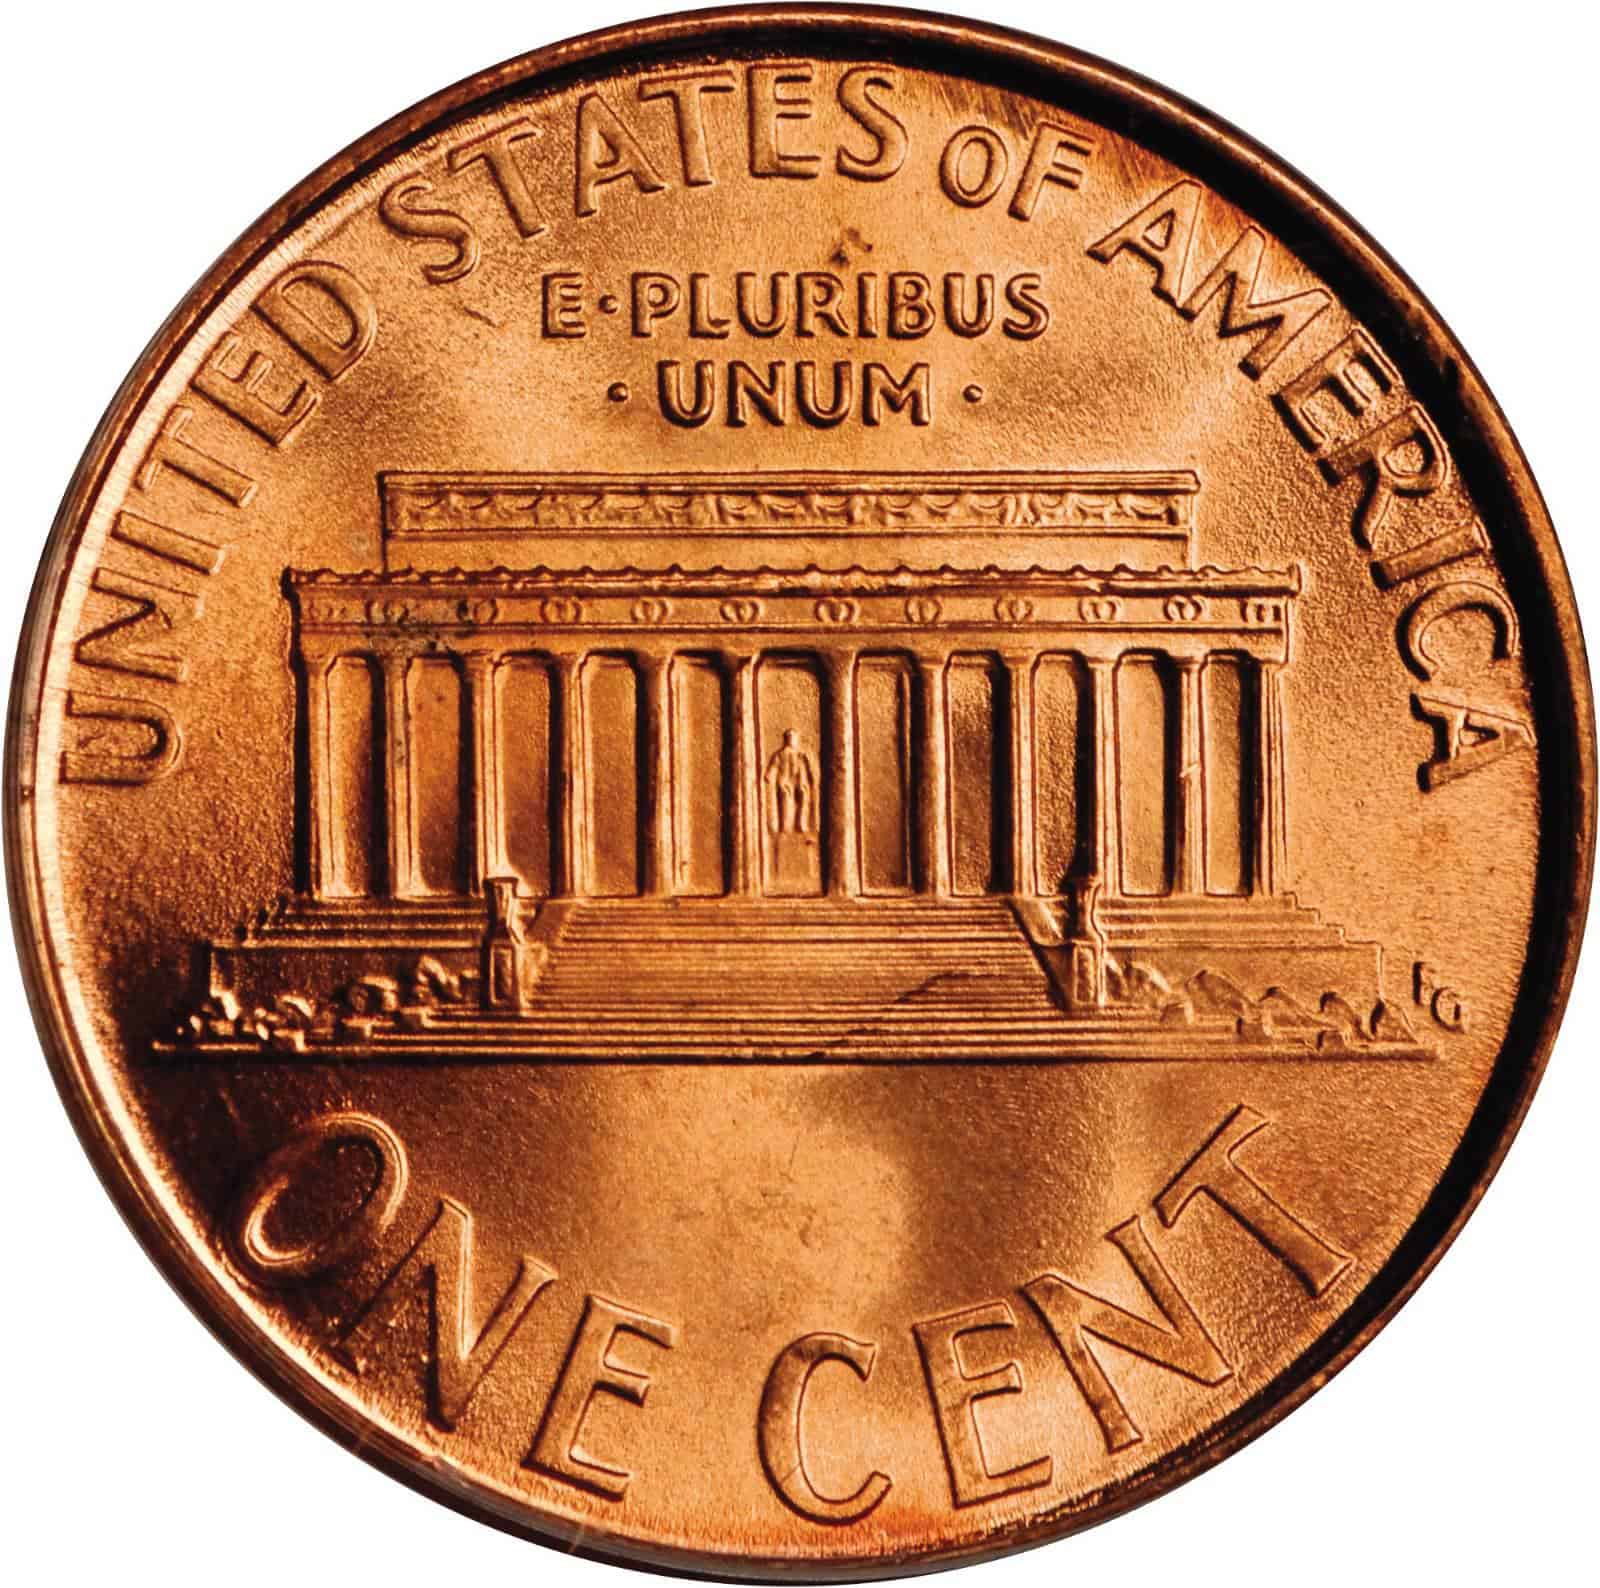 The Reverse of the 1994 Penny